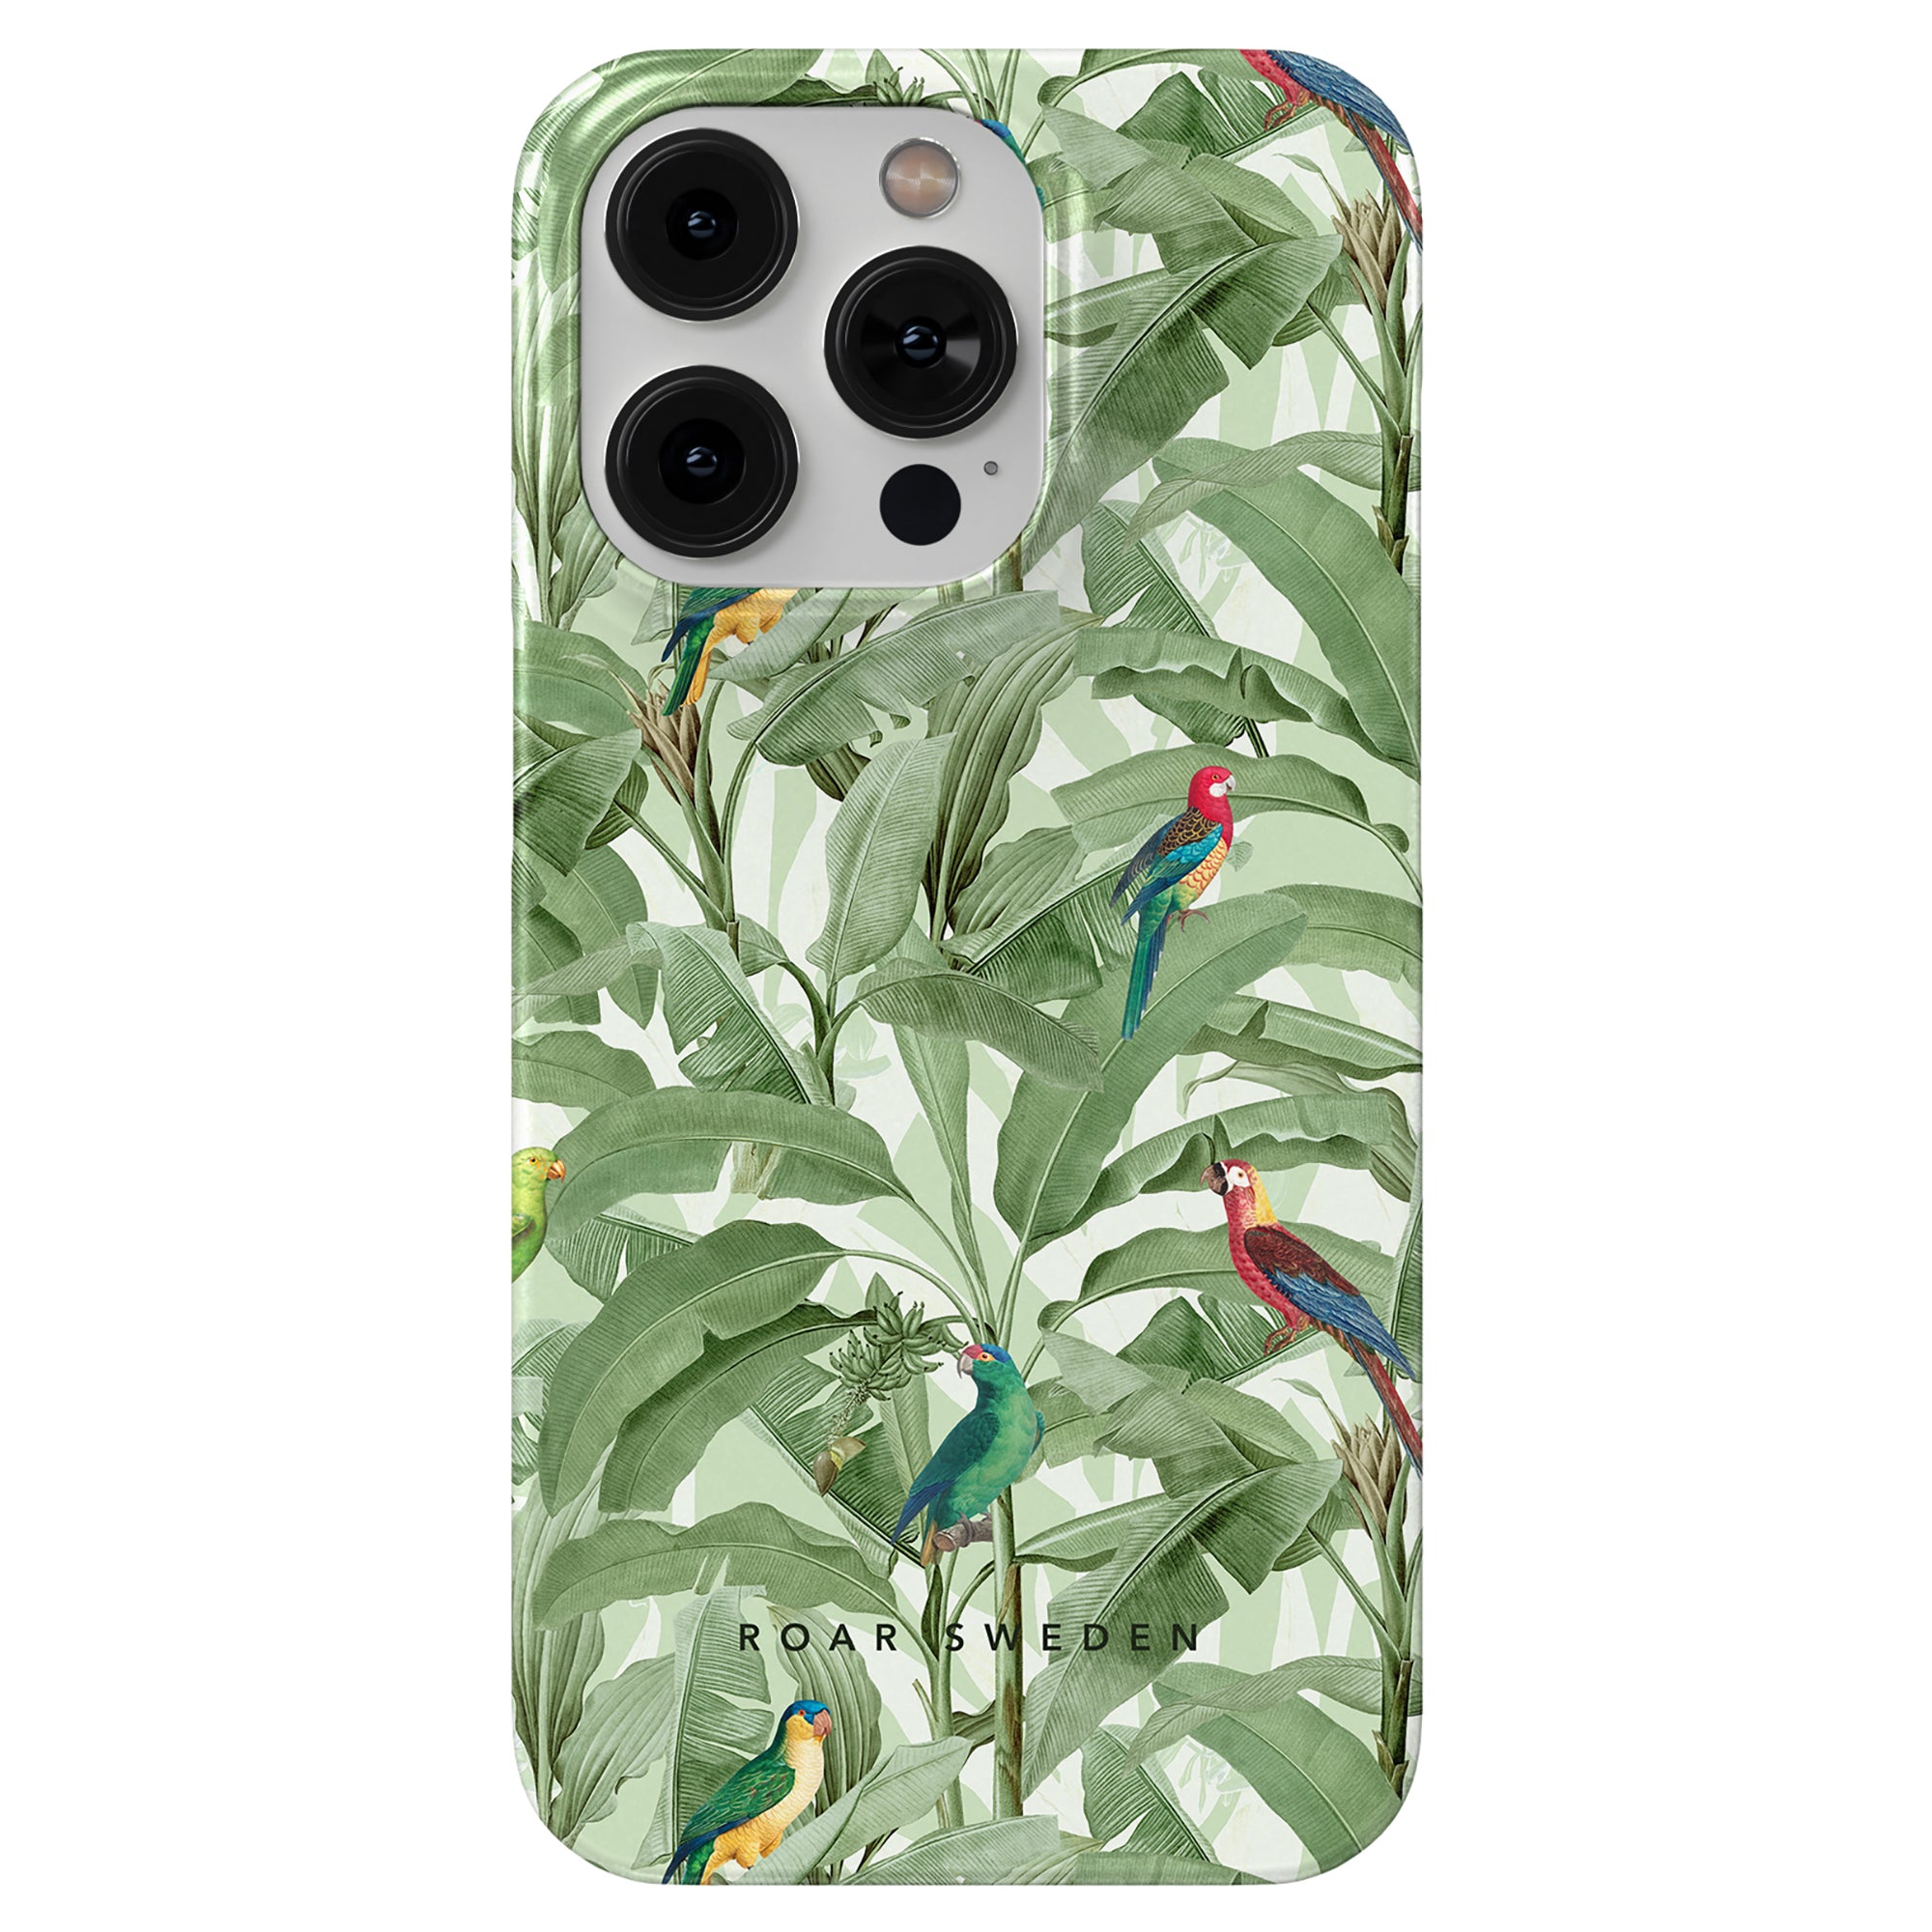 A Parrot Paradise - Slim case featuring a tropical leaf and parrot design is the perfect accessory for anyone looking to add a splash of nature to their device. With vibrant colors and a unique pattern, this case not only